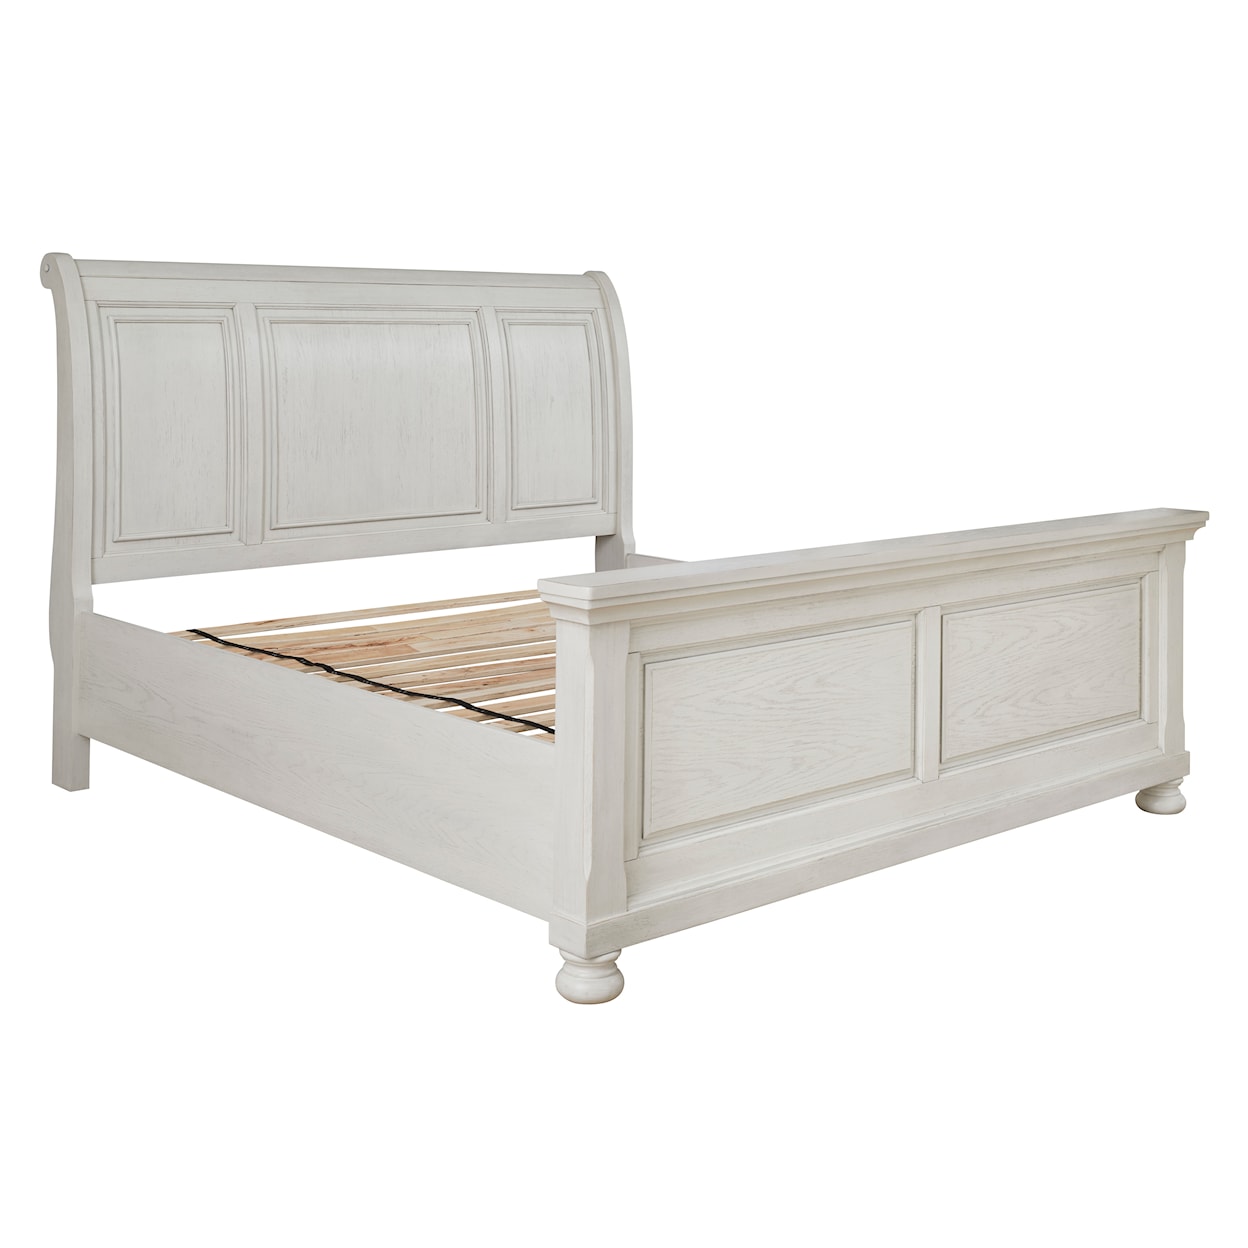 Benchcraft Robbinsdale California King Sleigh Bed